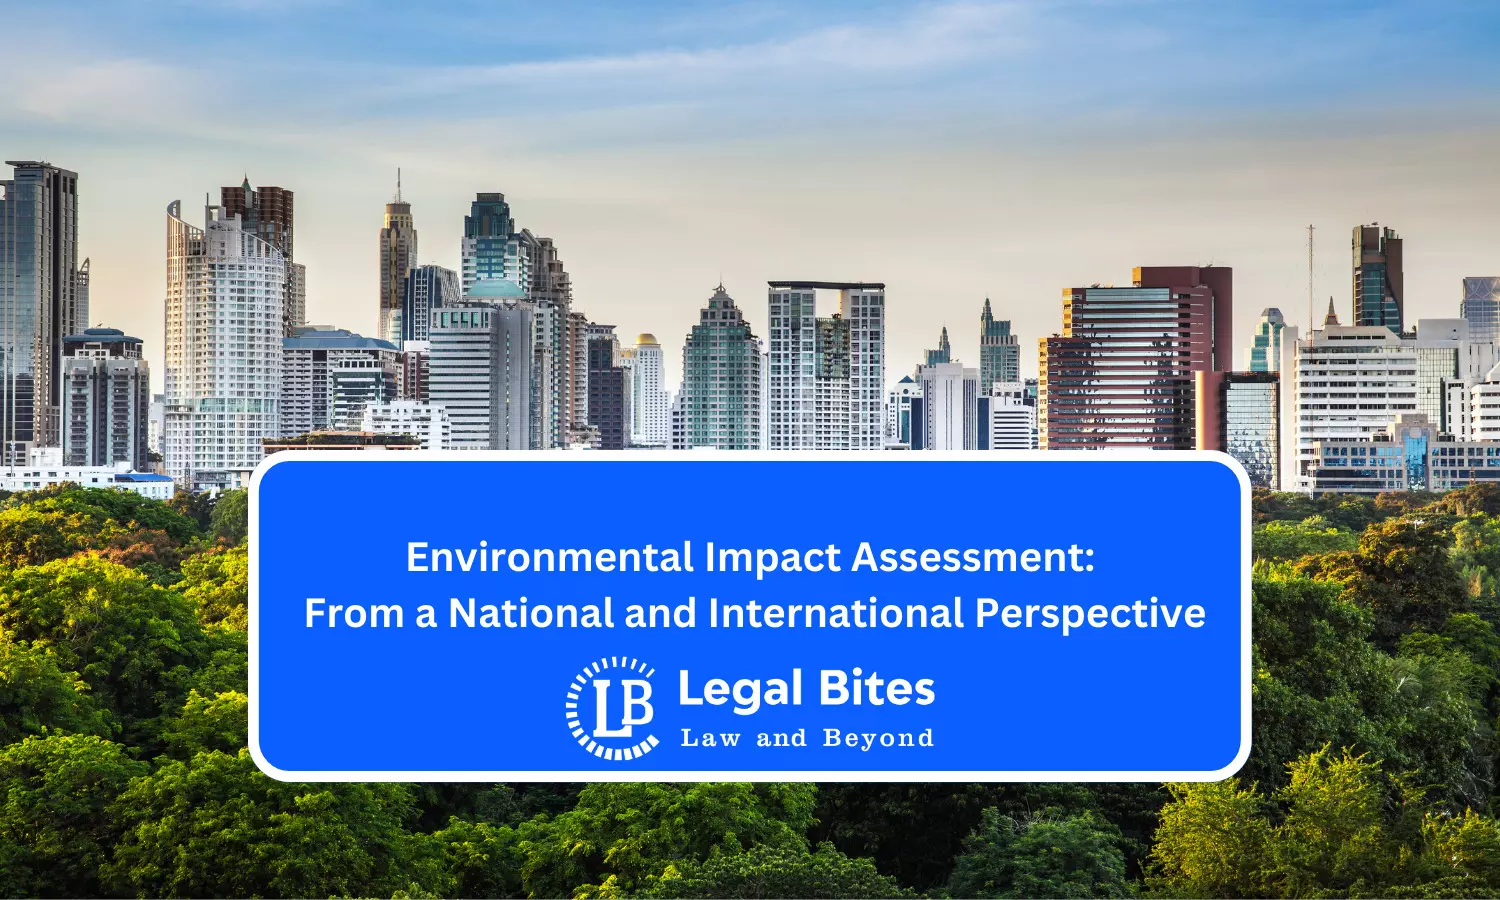 Environmental Impact Assessment: From a National and International Perspective